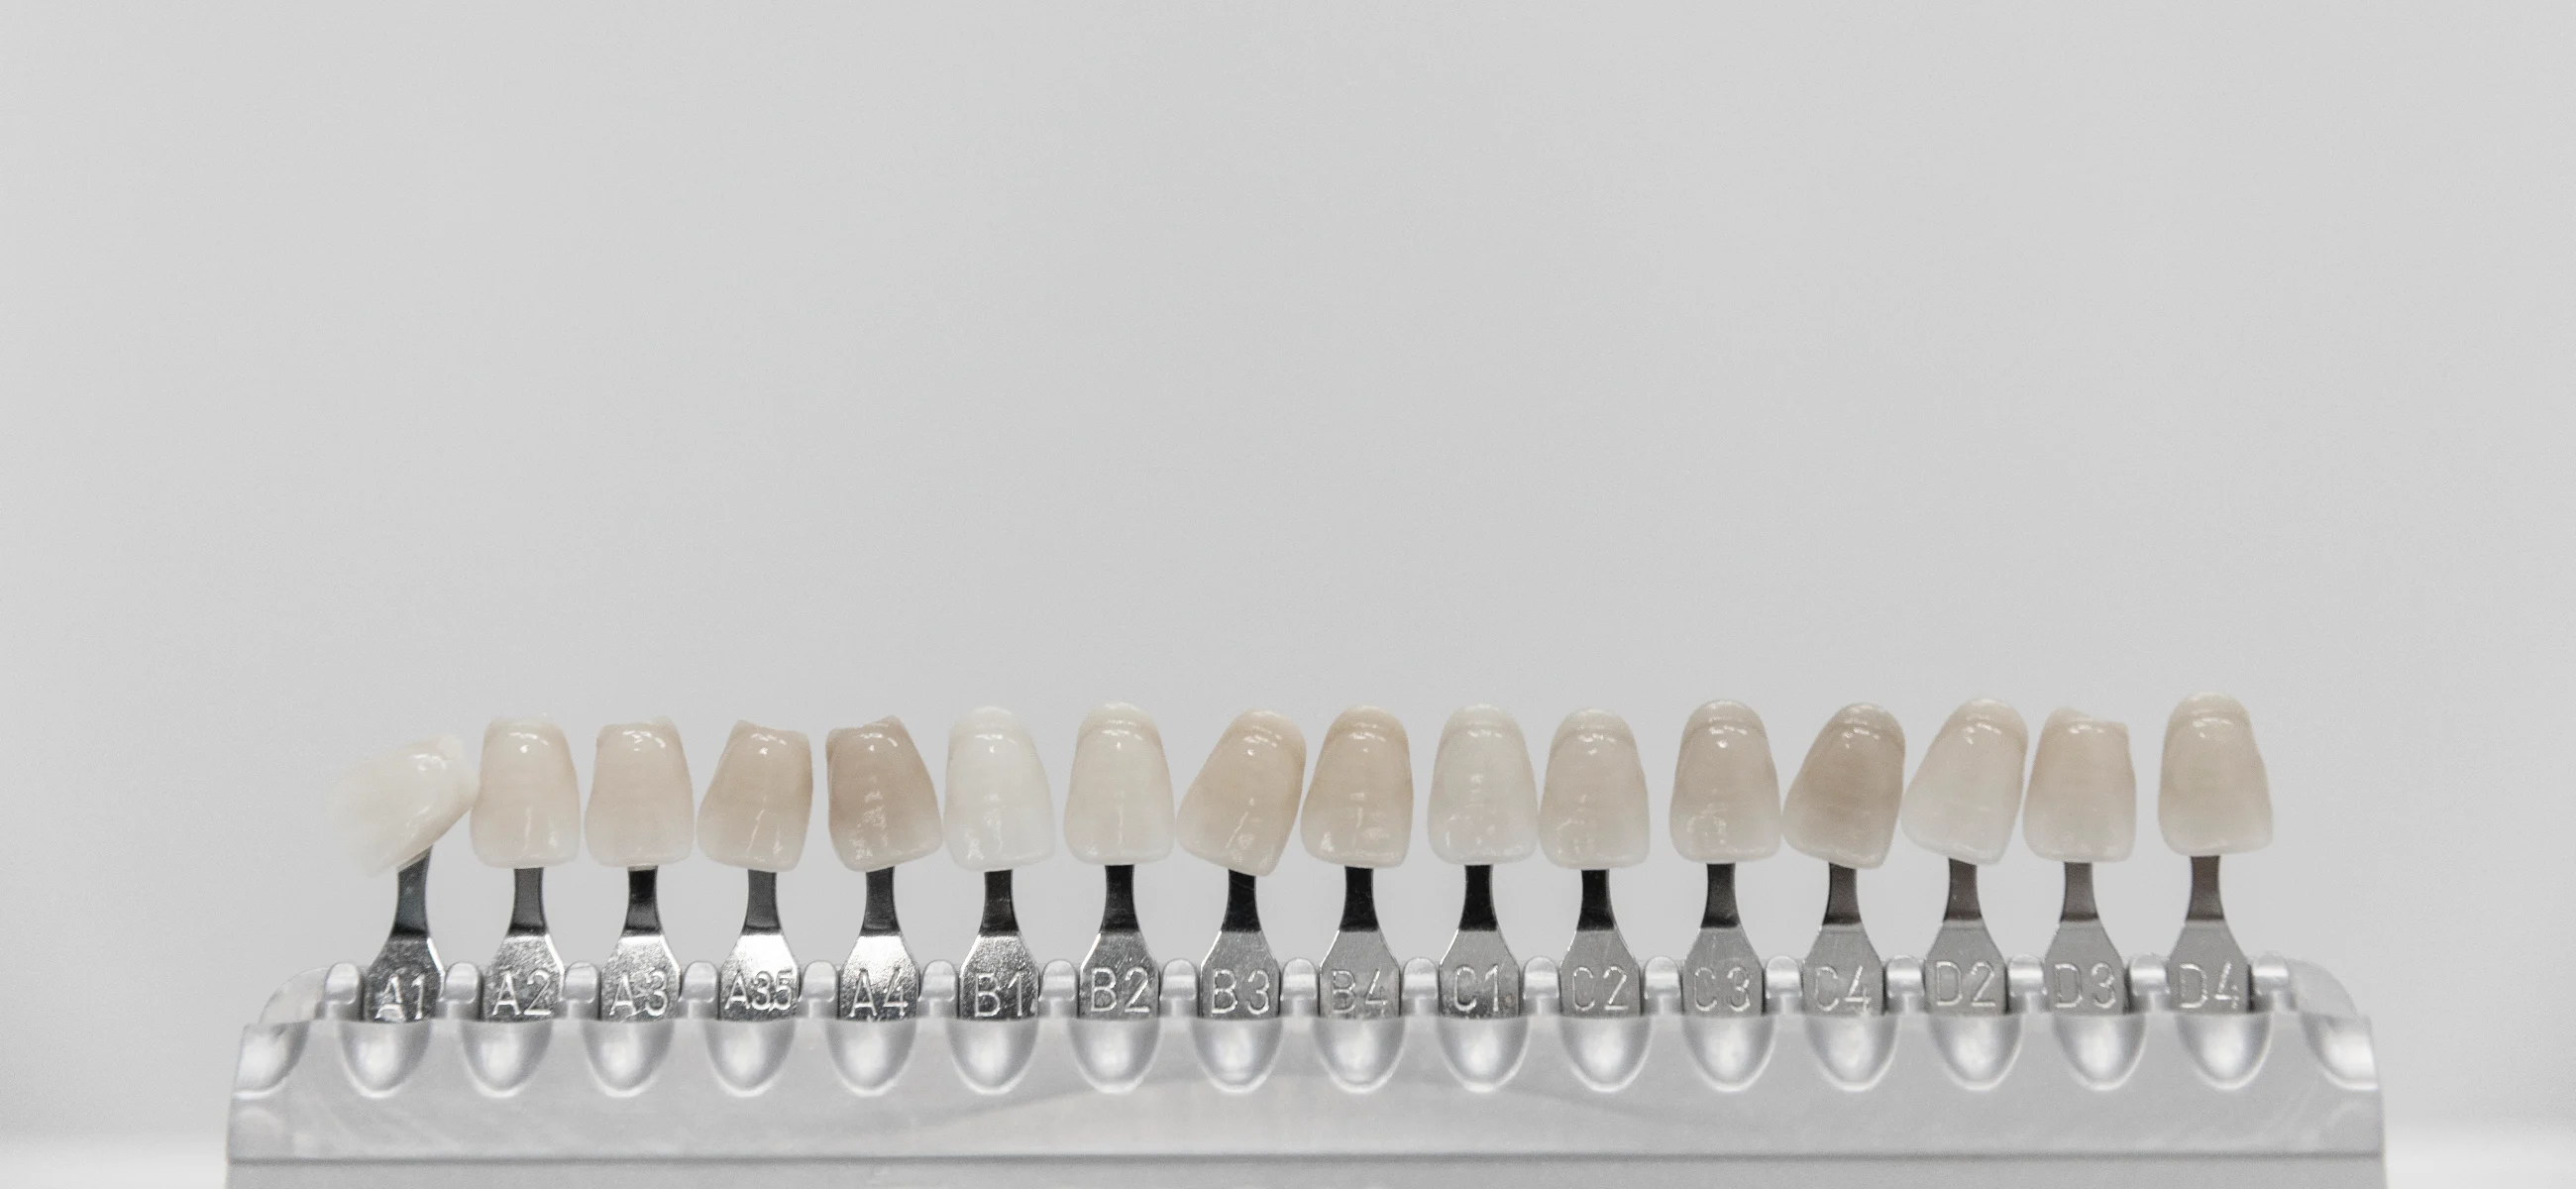 3 types of dental implants commonly used by dentists 